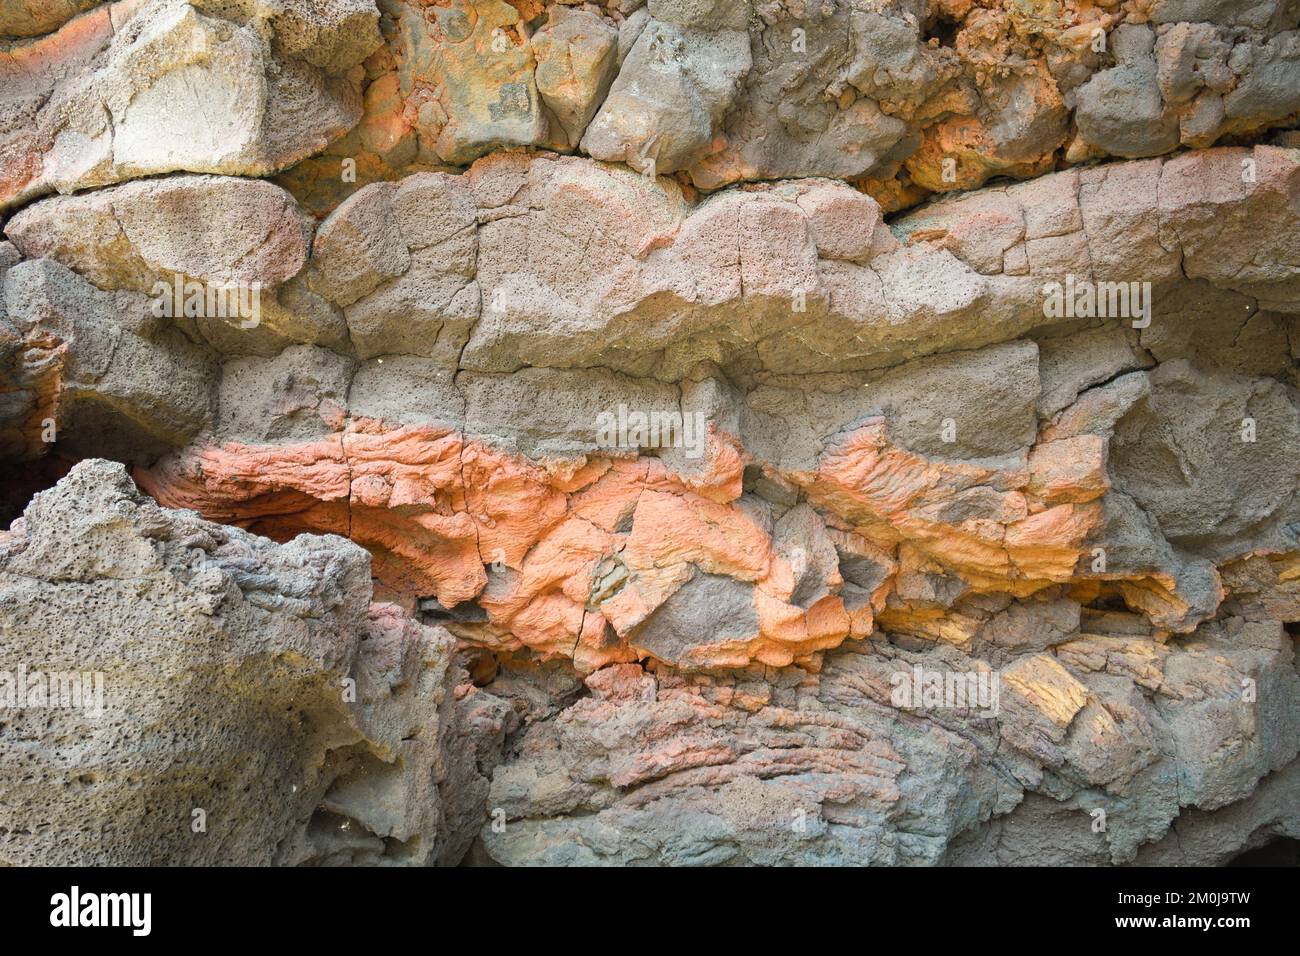 Detail of the shapes and colors of the lava rocks in Lanzarote Stock Photo